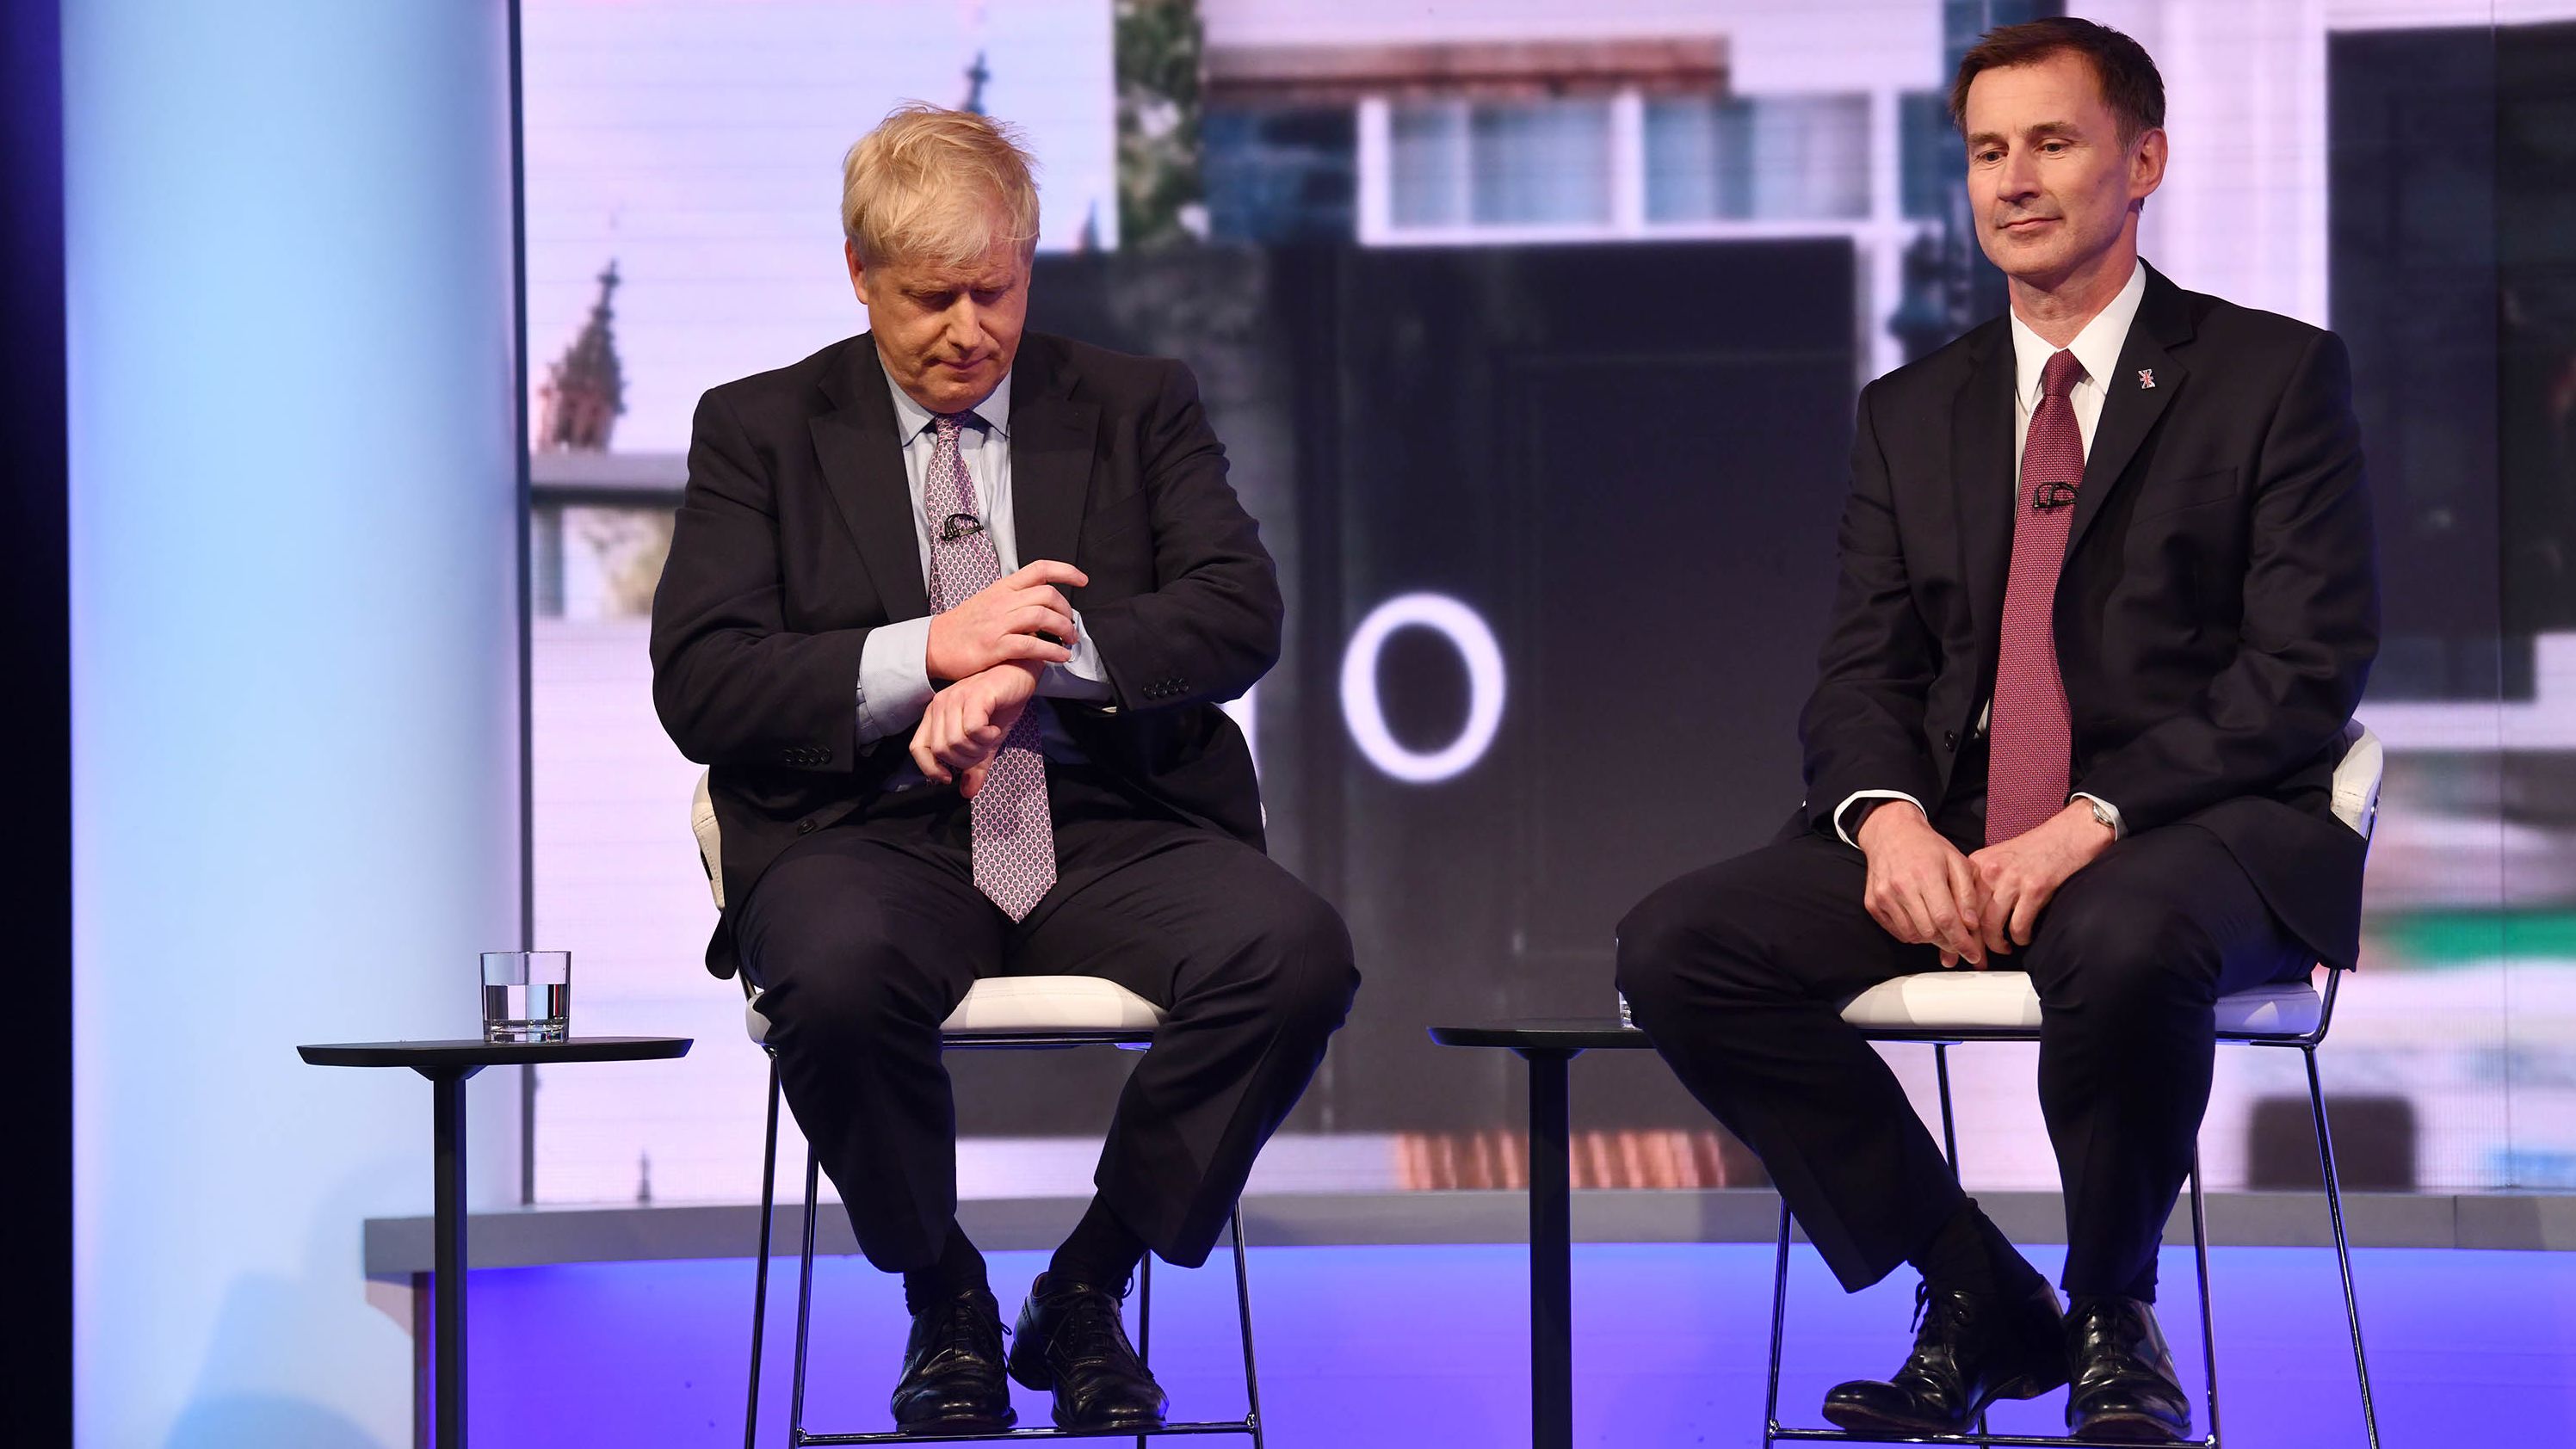 Johnson and Foreign Secretary Jeremy Hunt take part in the Conservative Leadership debate in June 2019.